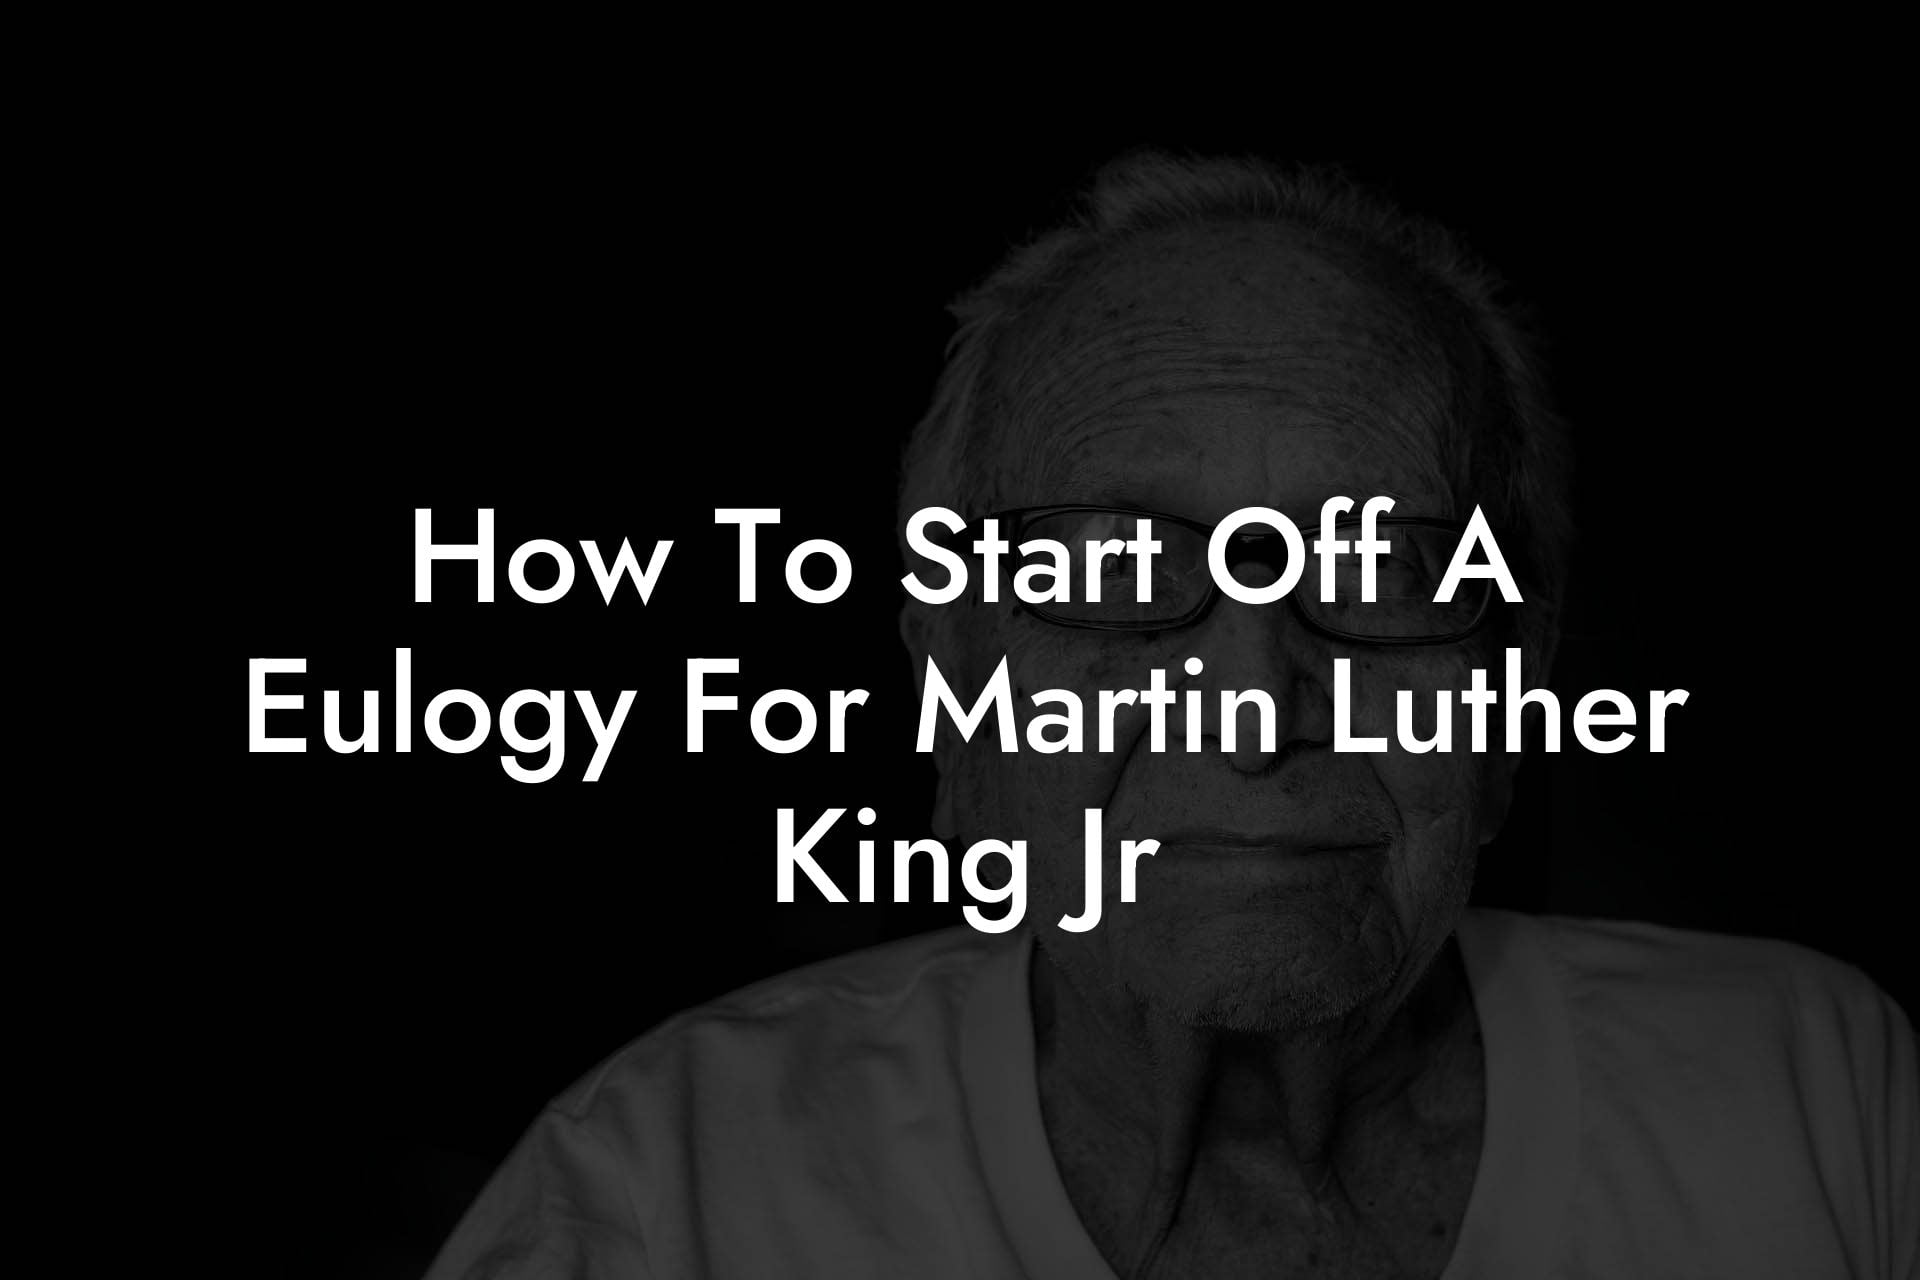 How To Start Off A Eulogy For Martin Luther King Jr